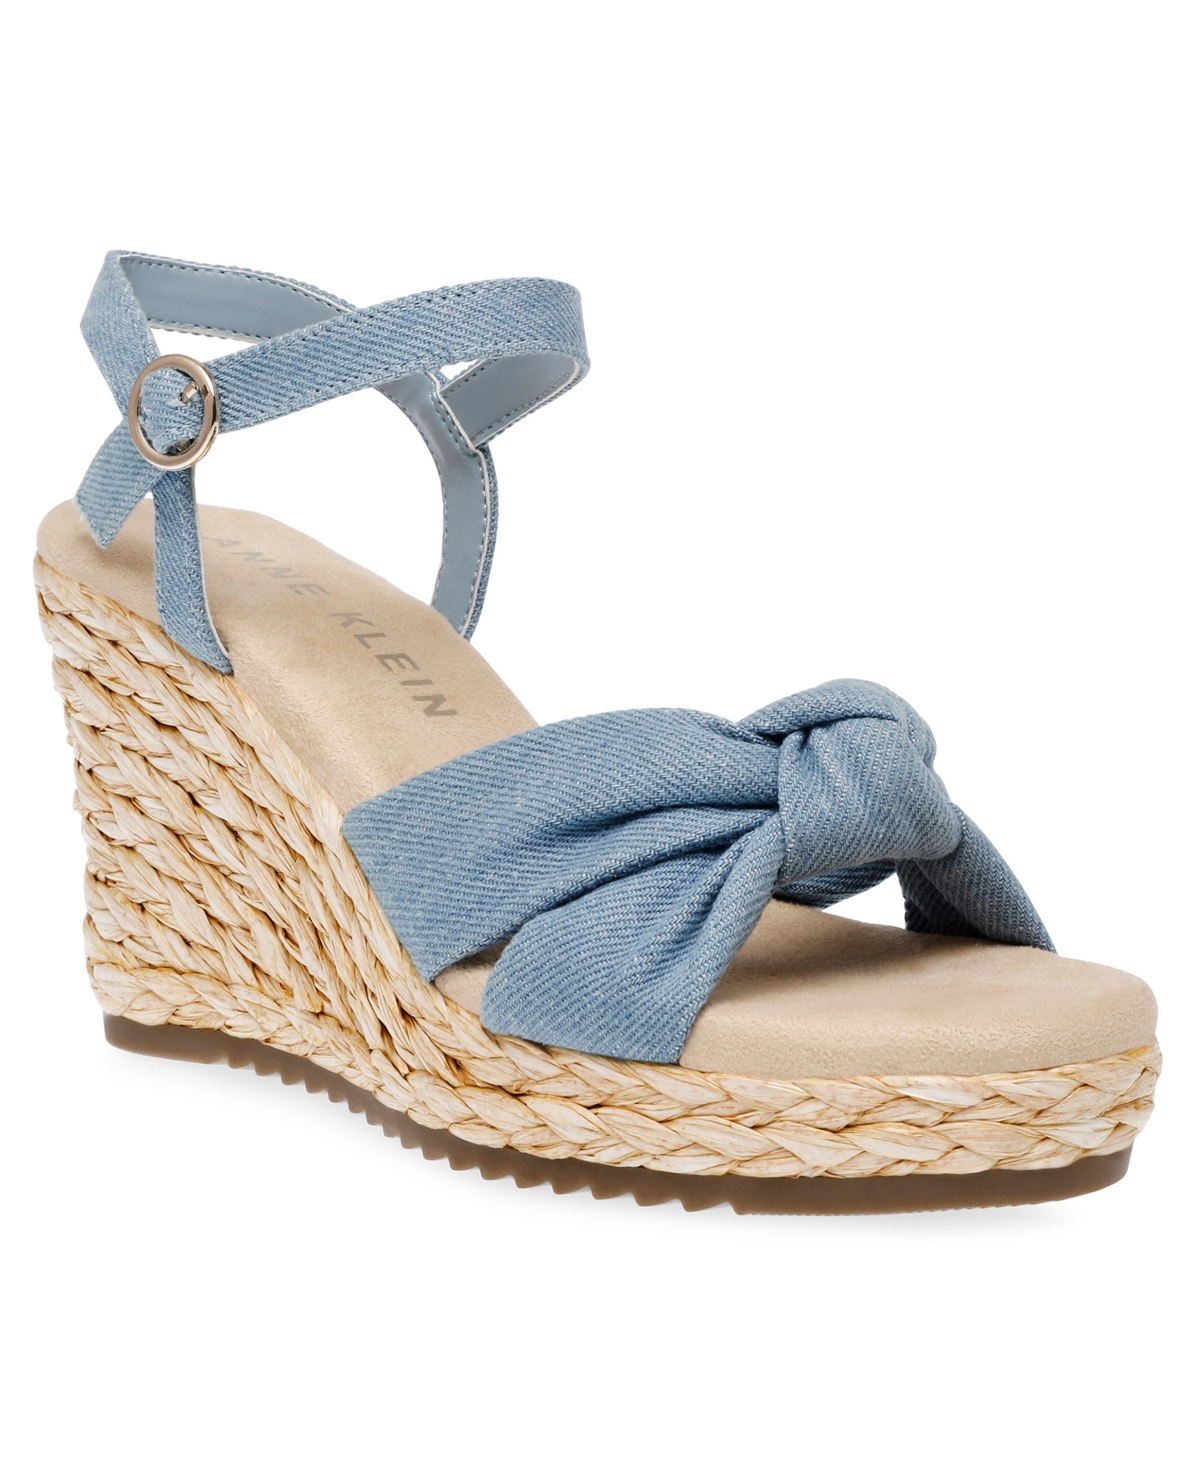 Women's Wheatley Ankle Strap Espadrille Wedge Sandals - White Smooth